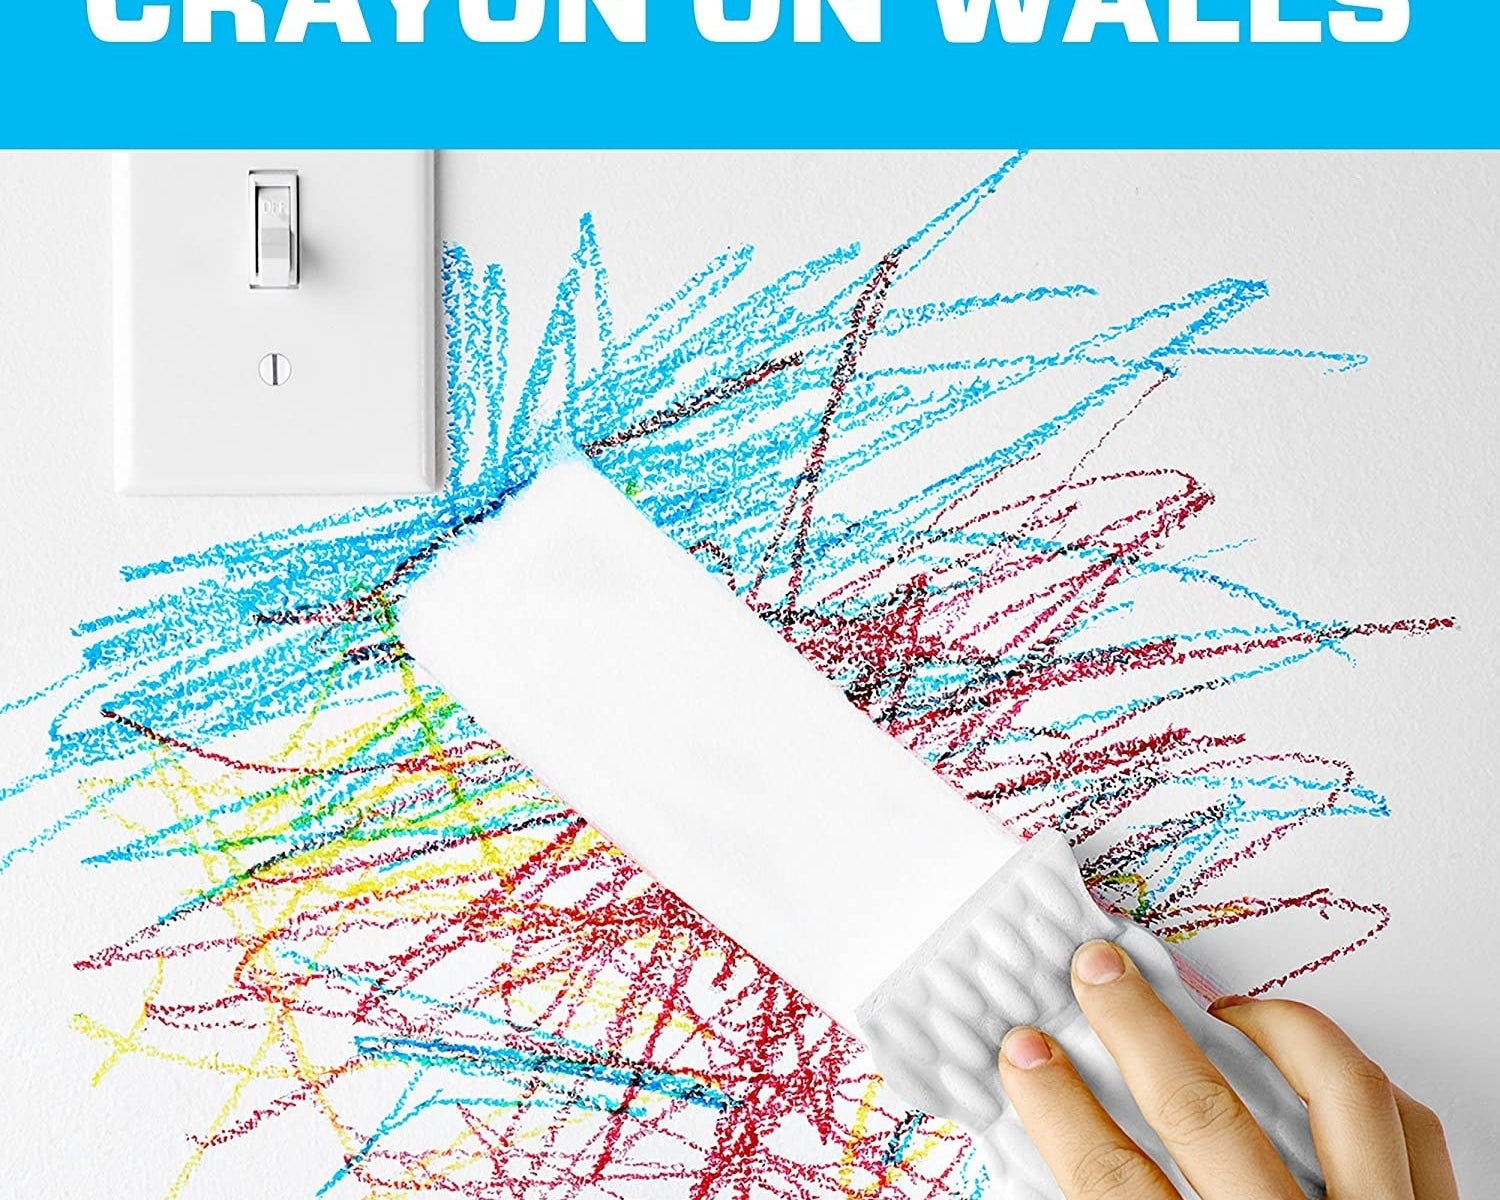 A person cleaning crayon off a wall with a small sponge